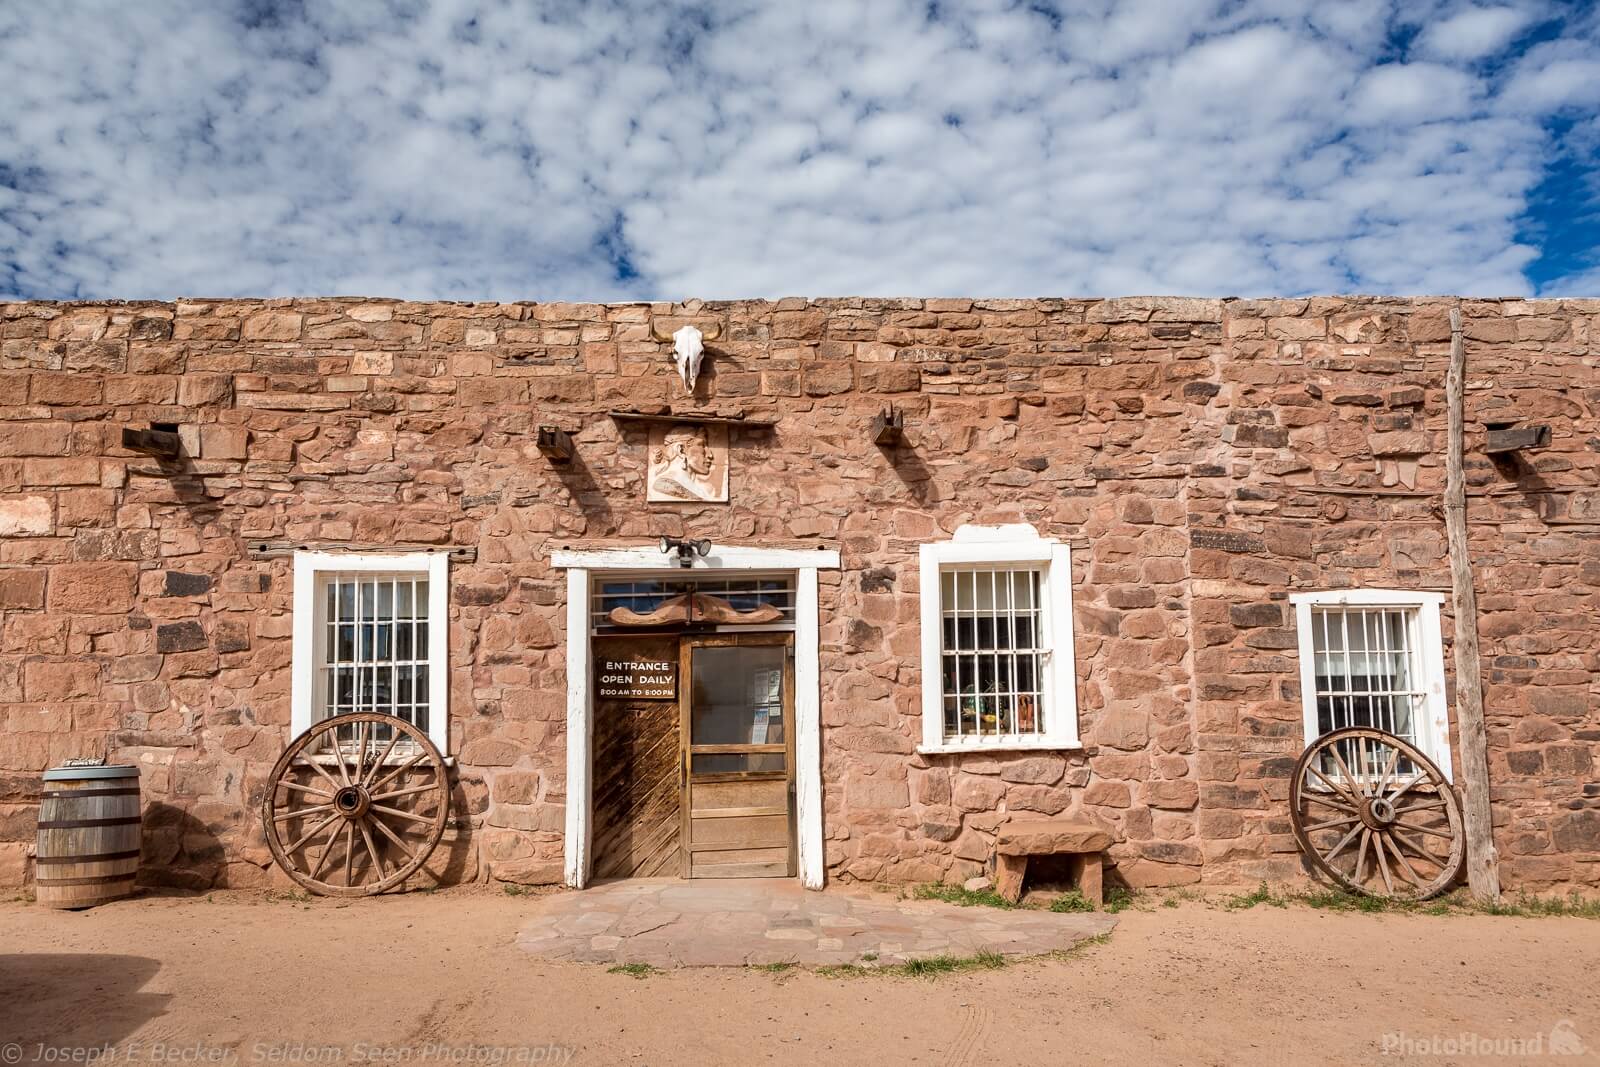 Image of Hubbell Trading Post by Joe Becker